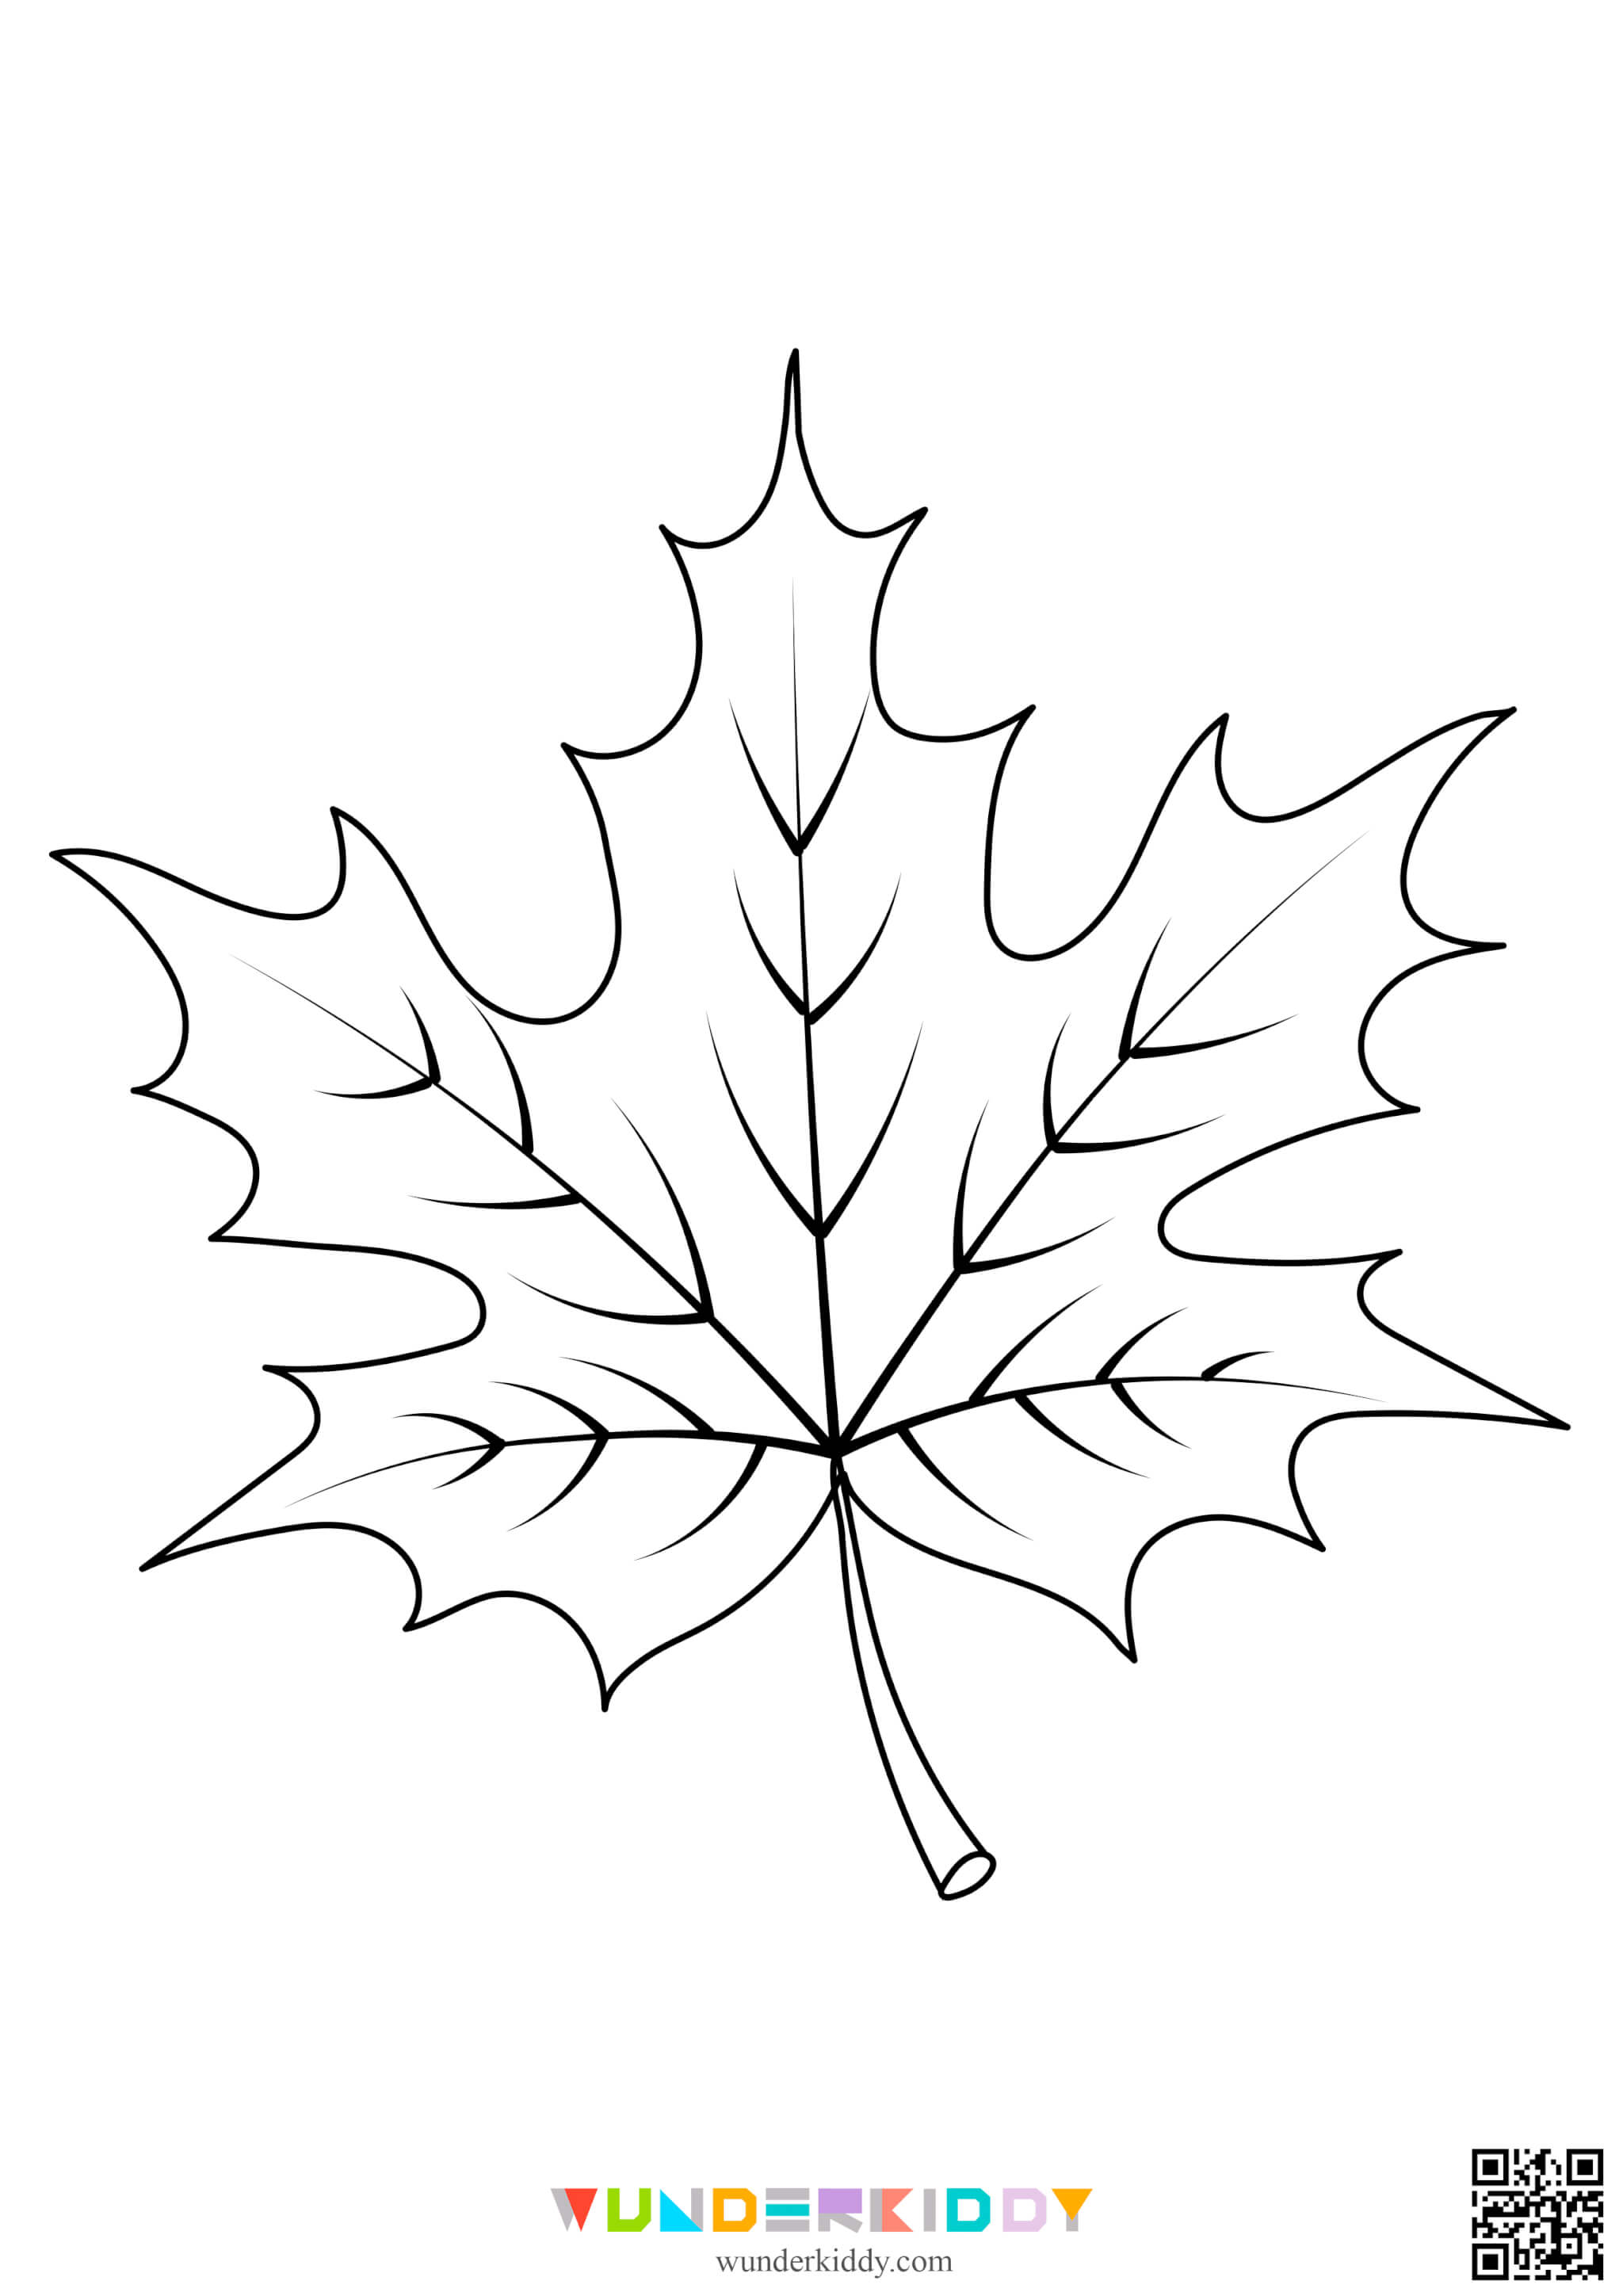 Fall Leaves Template - Image 9